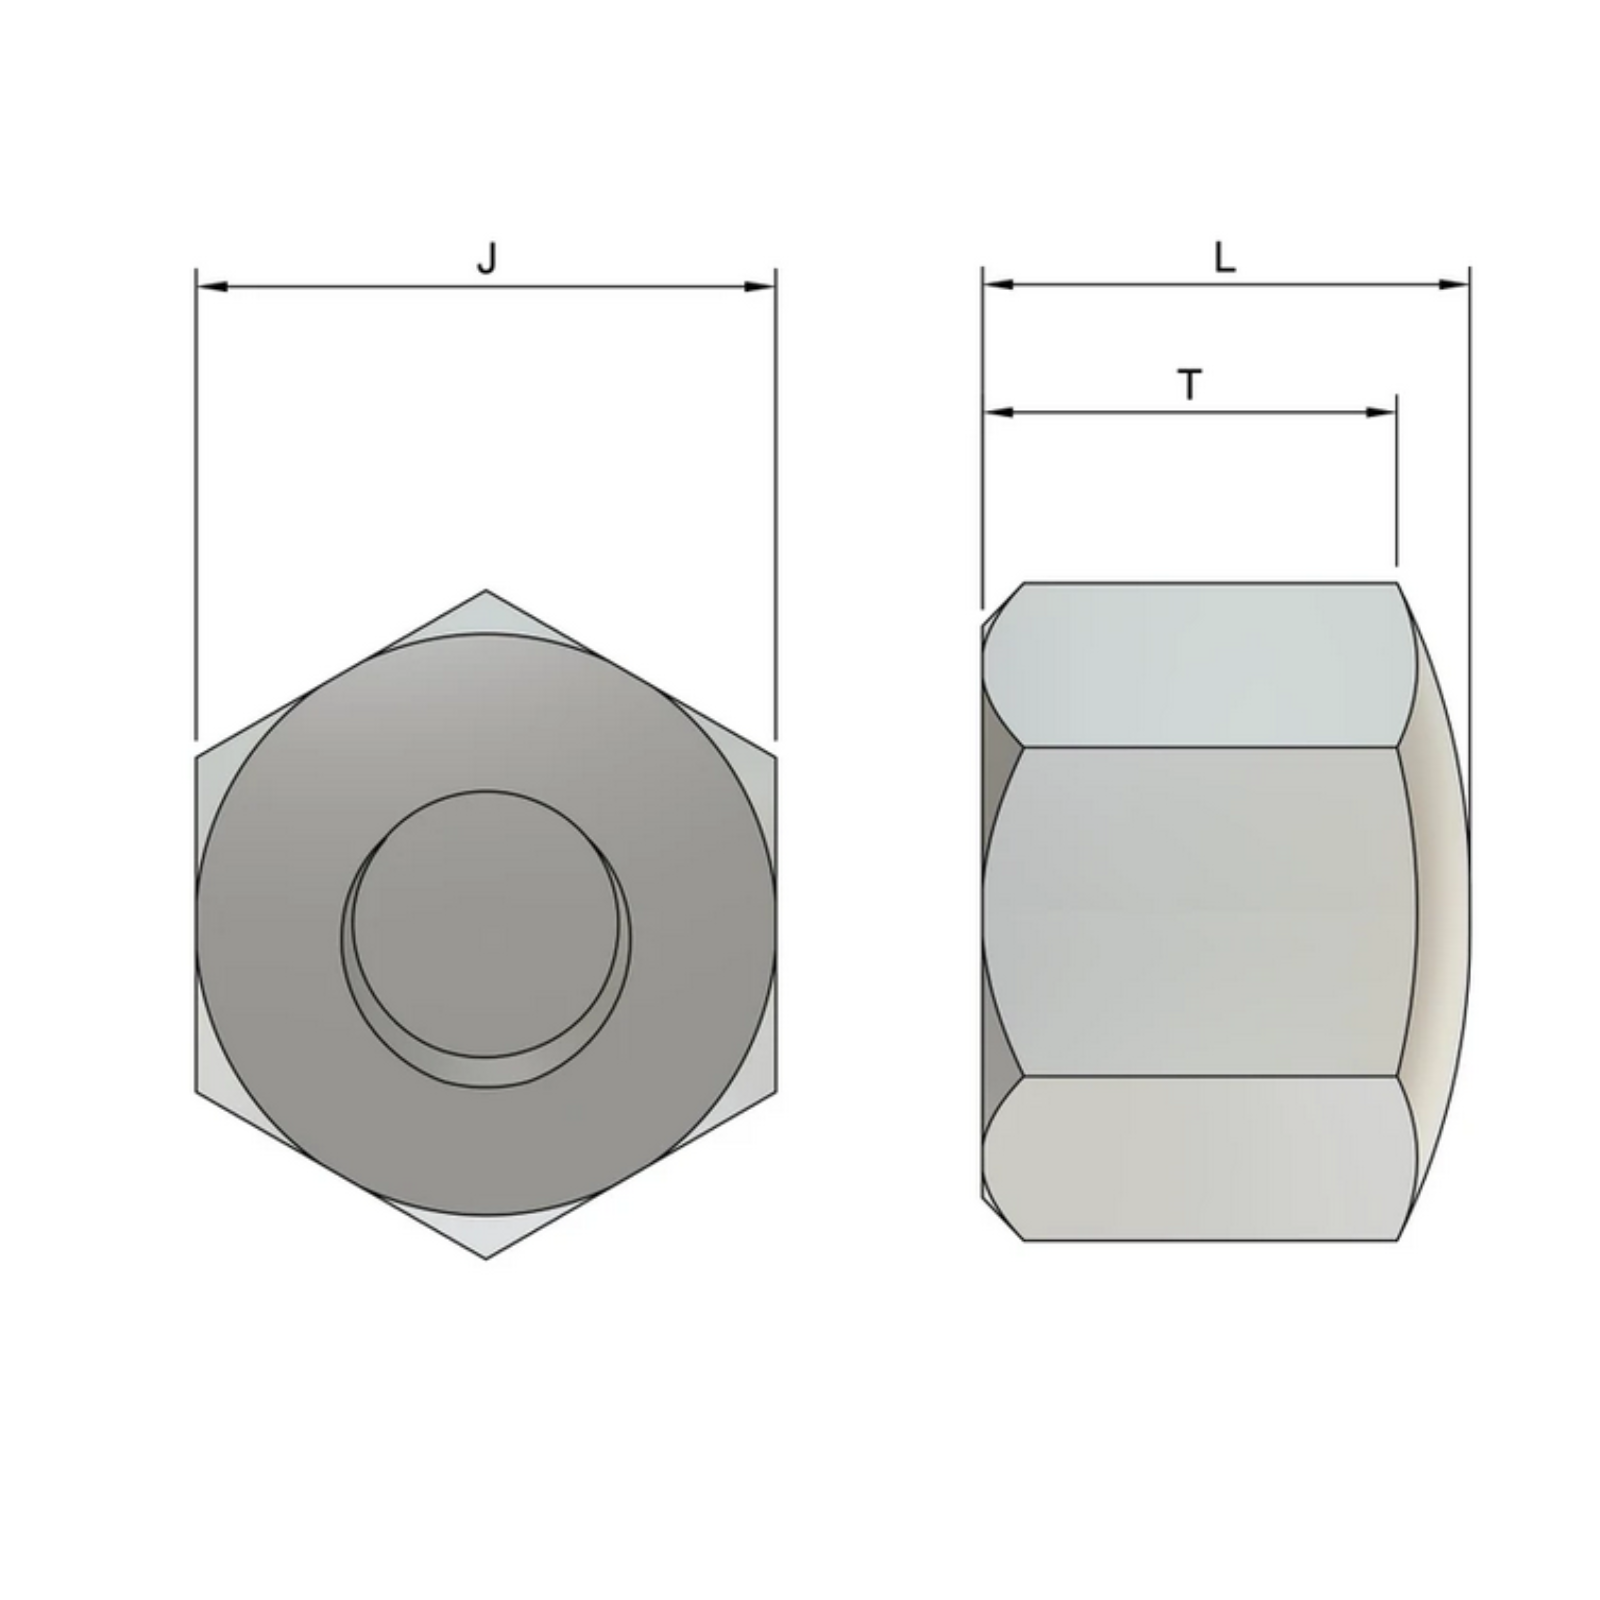 M5 Cap Nuts (DIN 917) - Stainless Steel (A2)